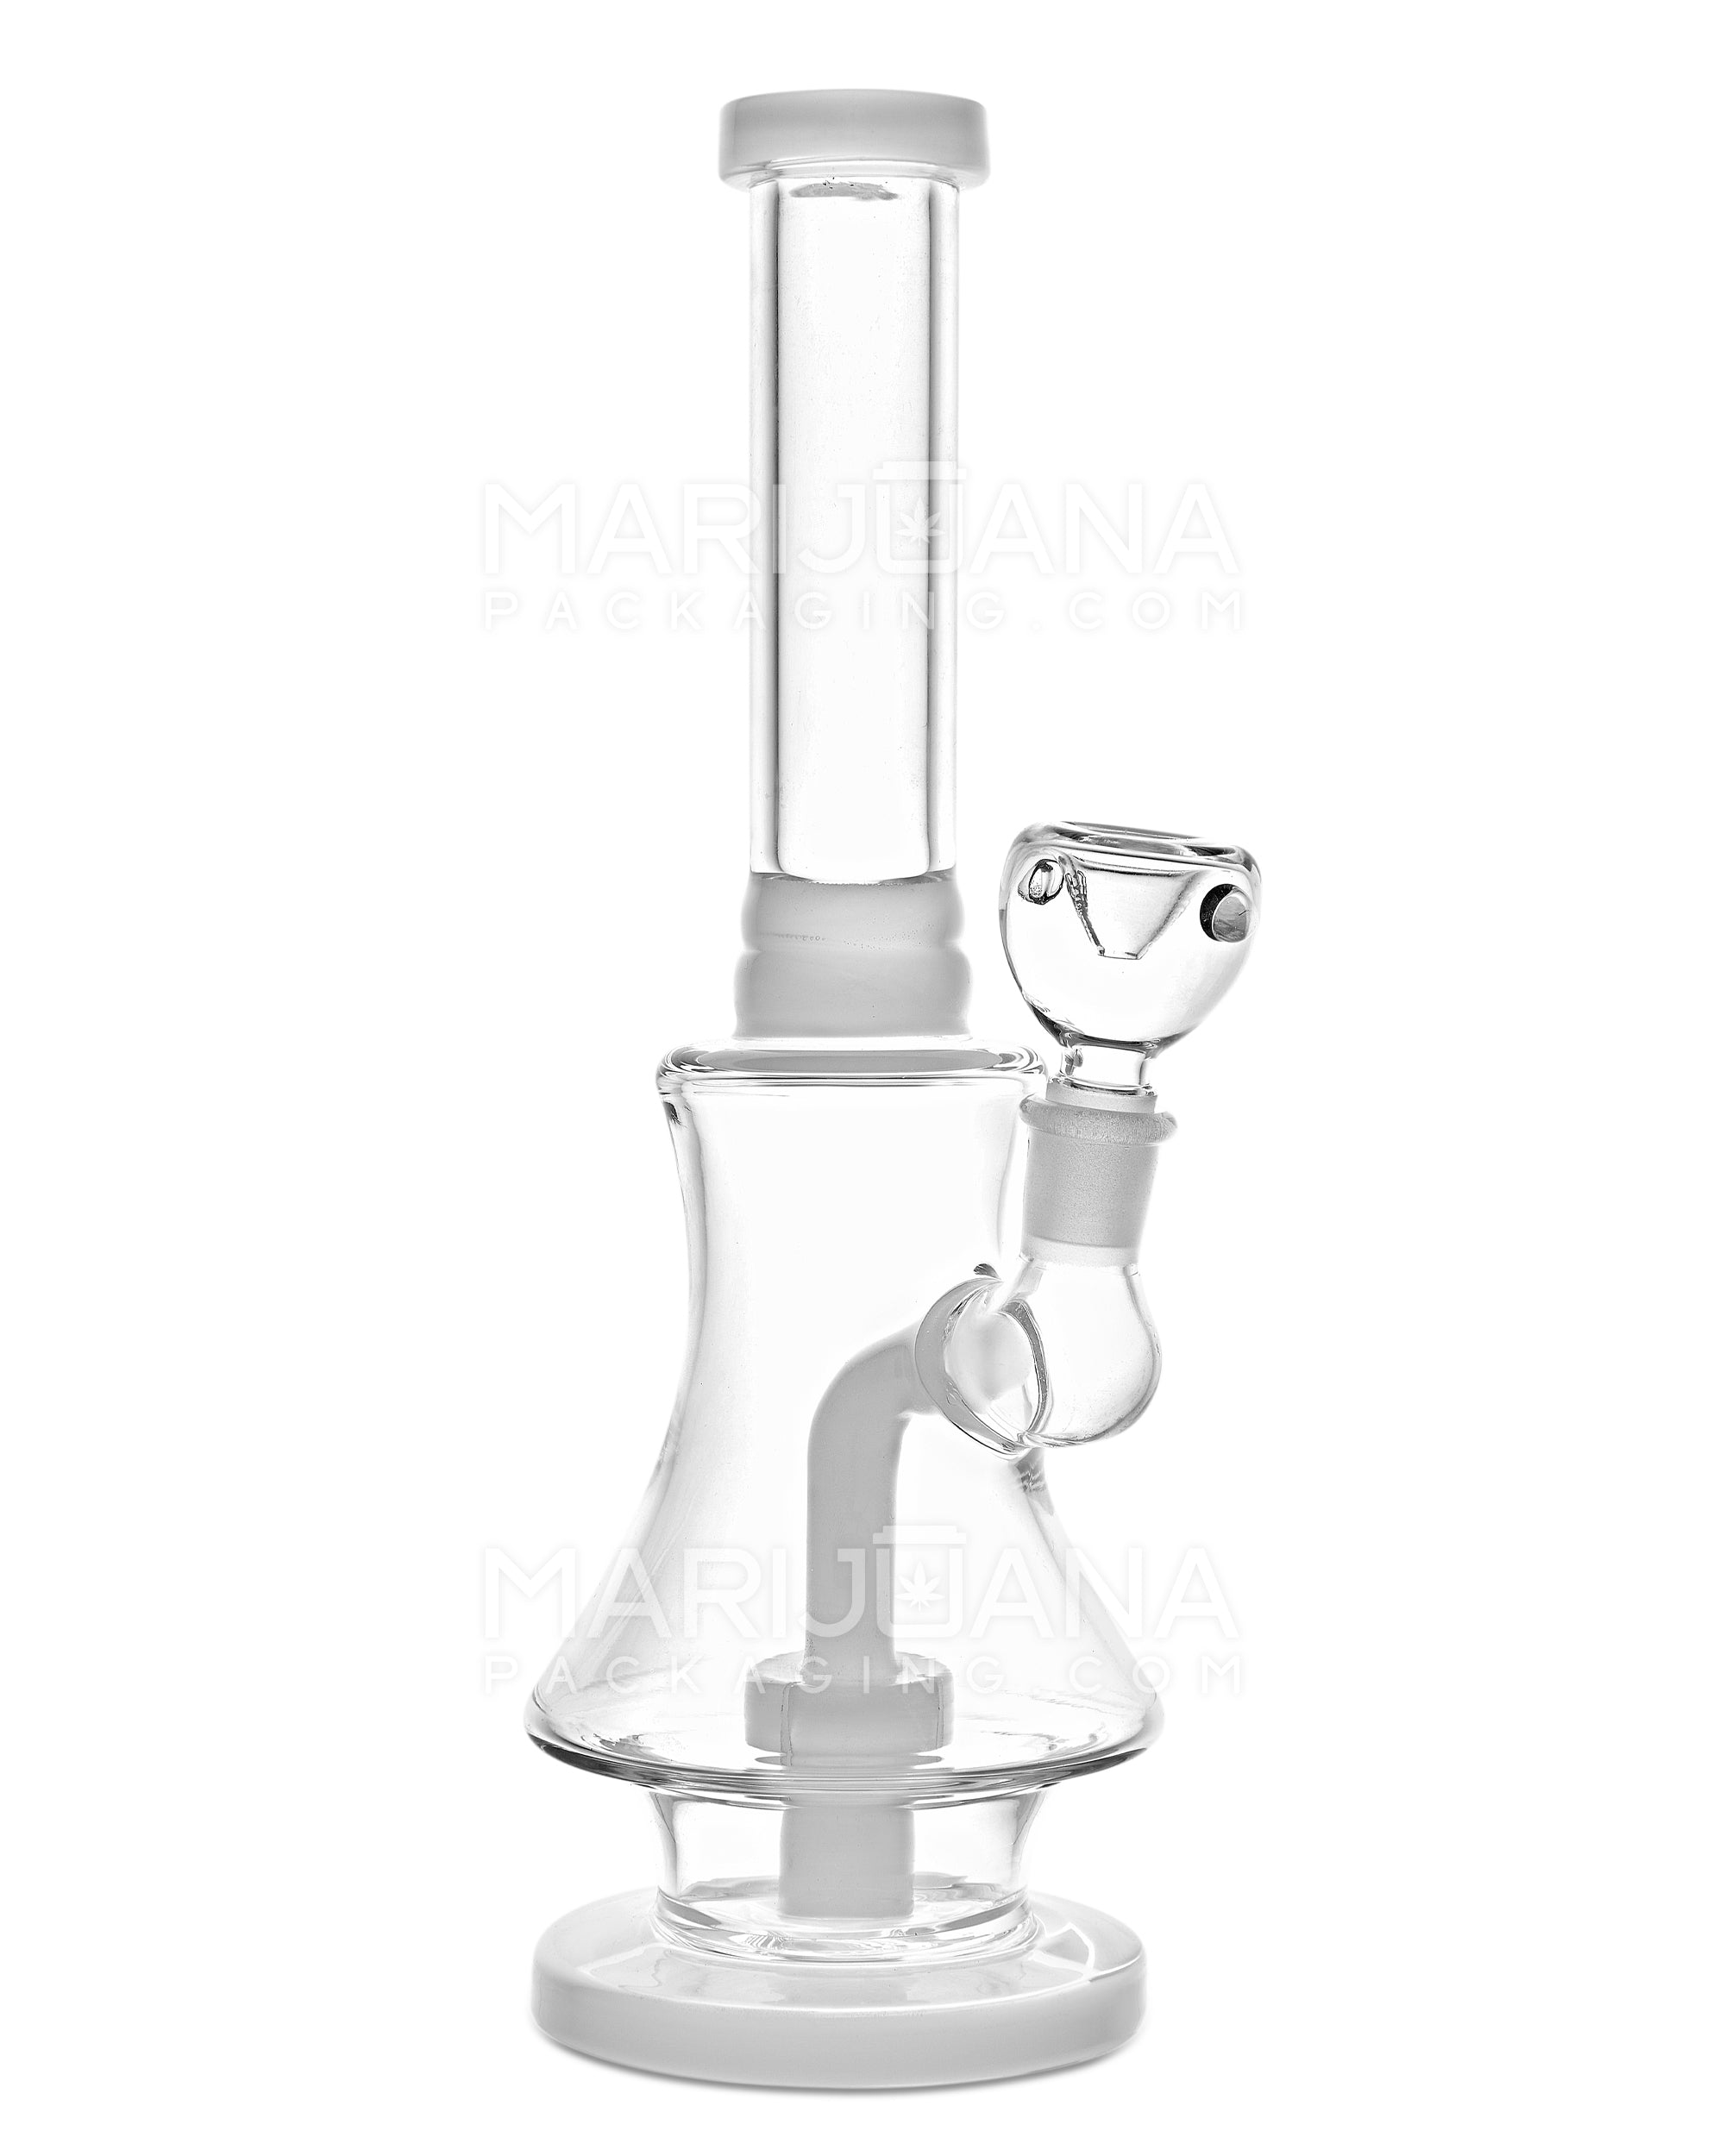 Straight Neck Showerhead Perc Glass Bell Water Pipe | 10in Tall - 14mm Bowl - White - 4